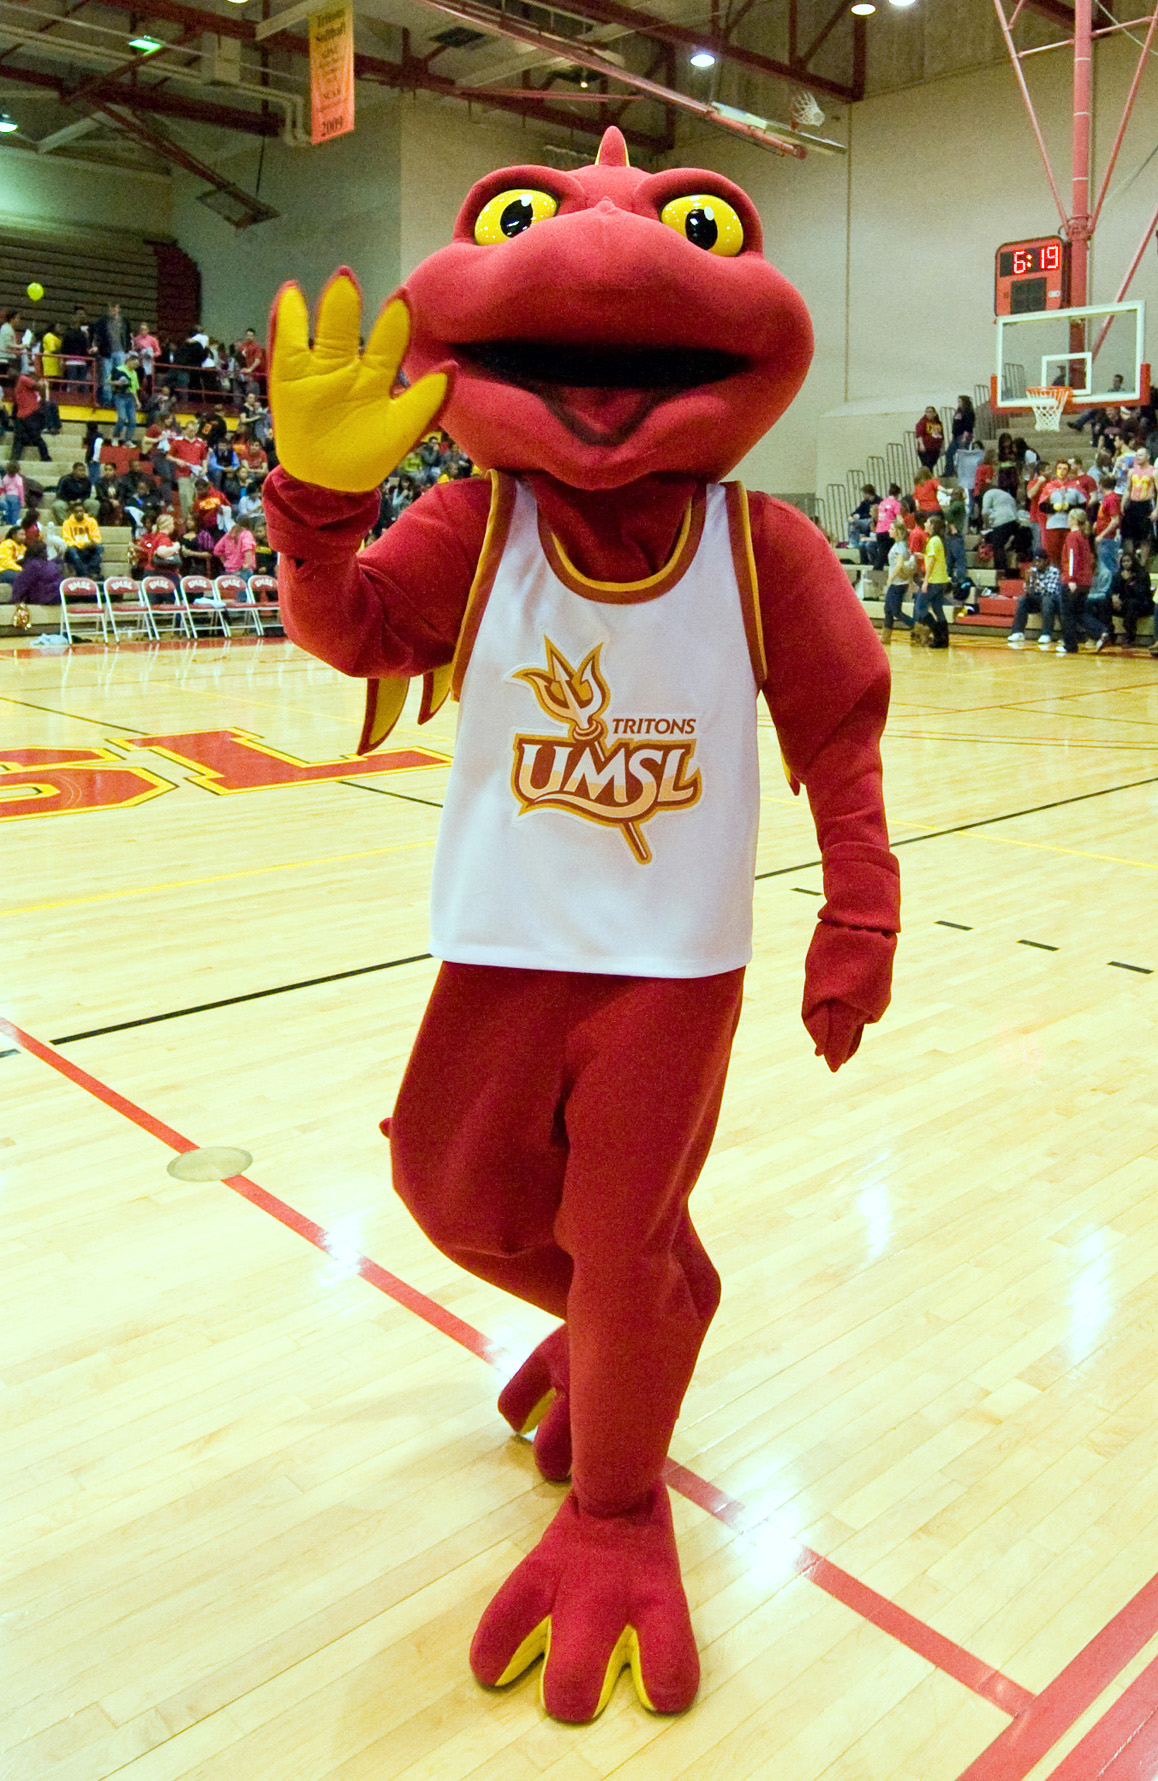 Mascot: What's my name? - UMSL Daily | UMSL Daily